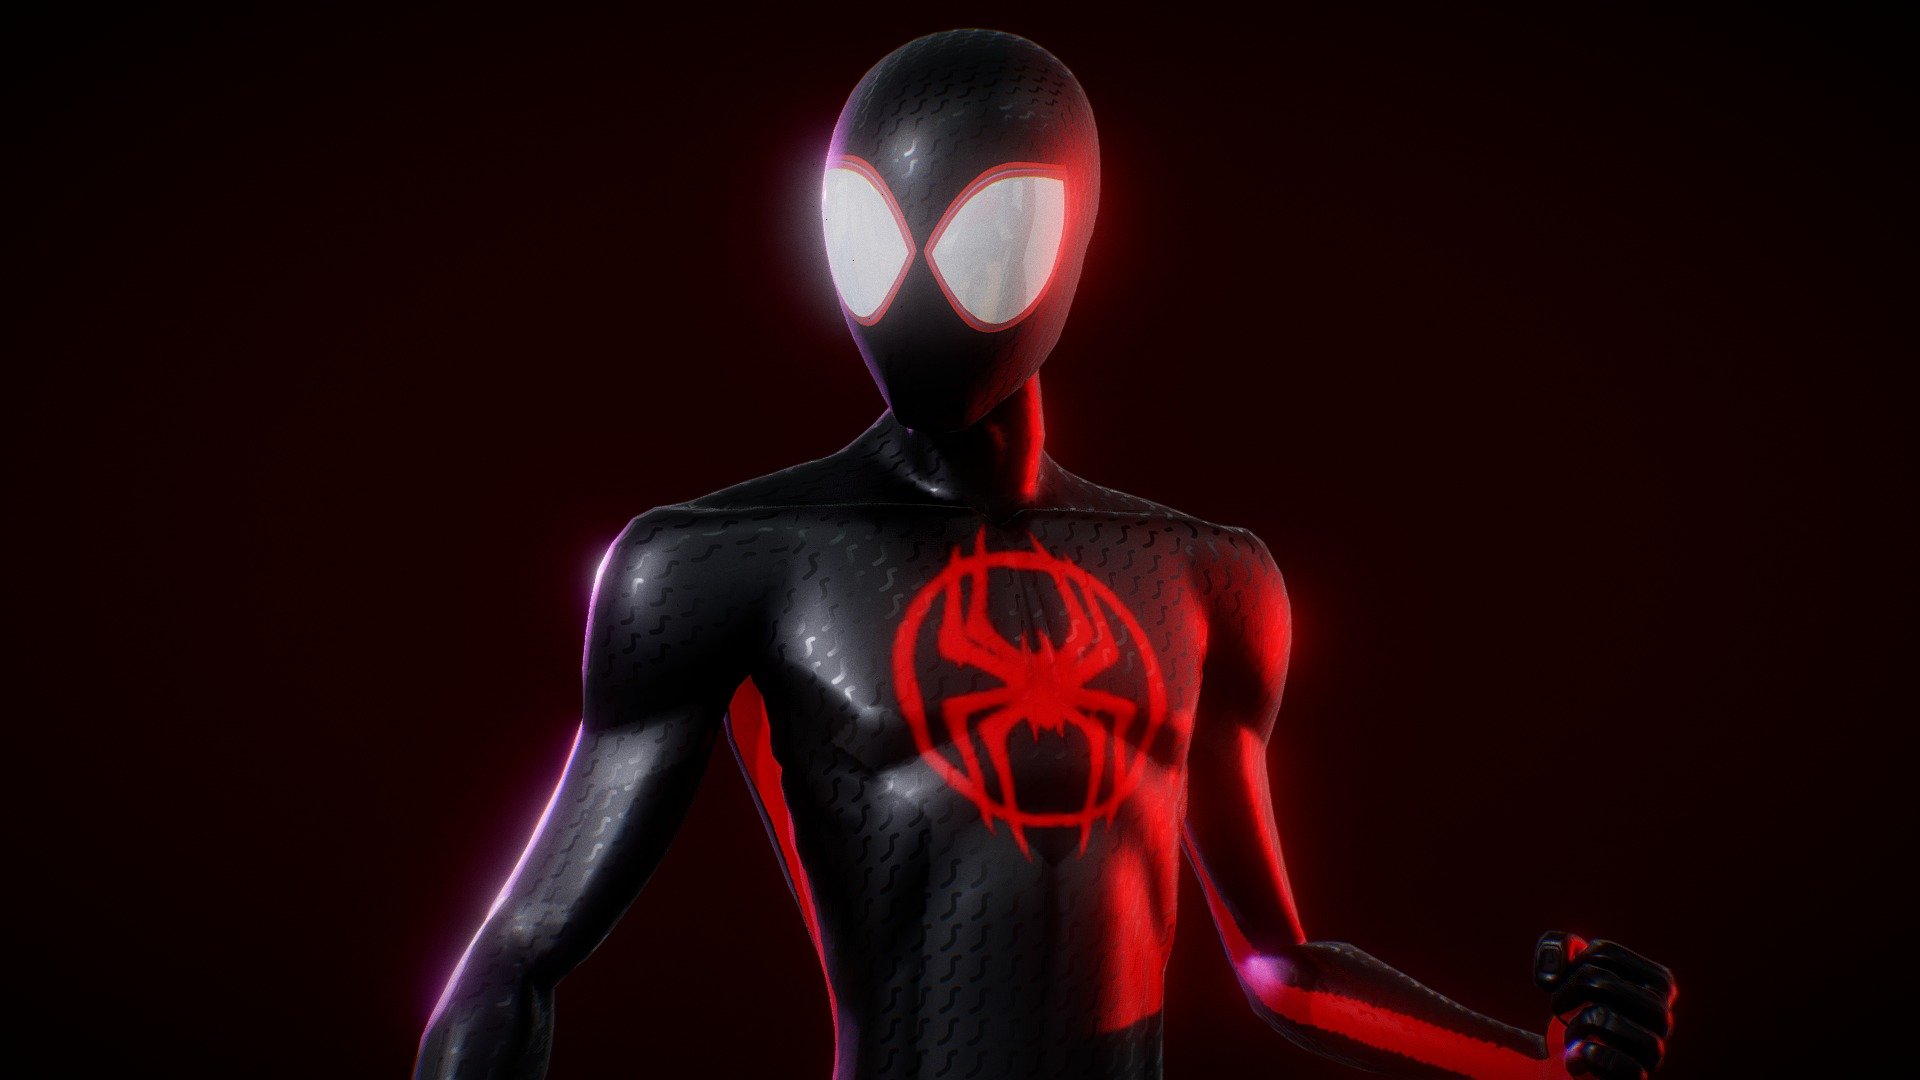 An updated version from this https://sketchfab.com/3d-models/miles-morales-across-the-spider-verse-e07f49a8eb2e45adb0946d8c243a17ad model.

Rigged

Textured

Reproportion and add a new lenses. Hope you like it :D - Miles Morales Updated Version - Download Free 3D model by CVRxEarth 3d model